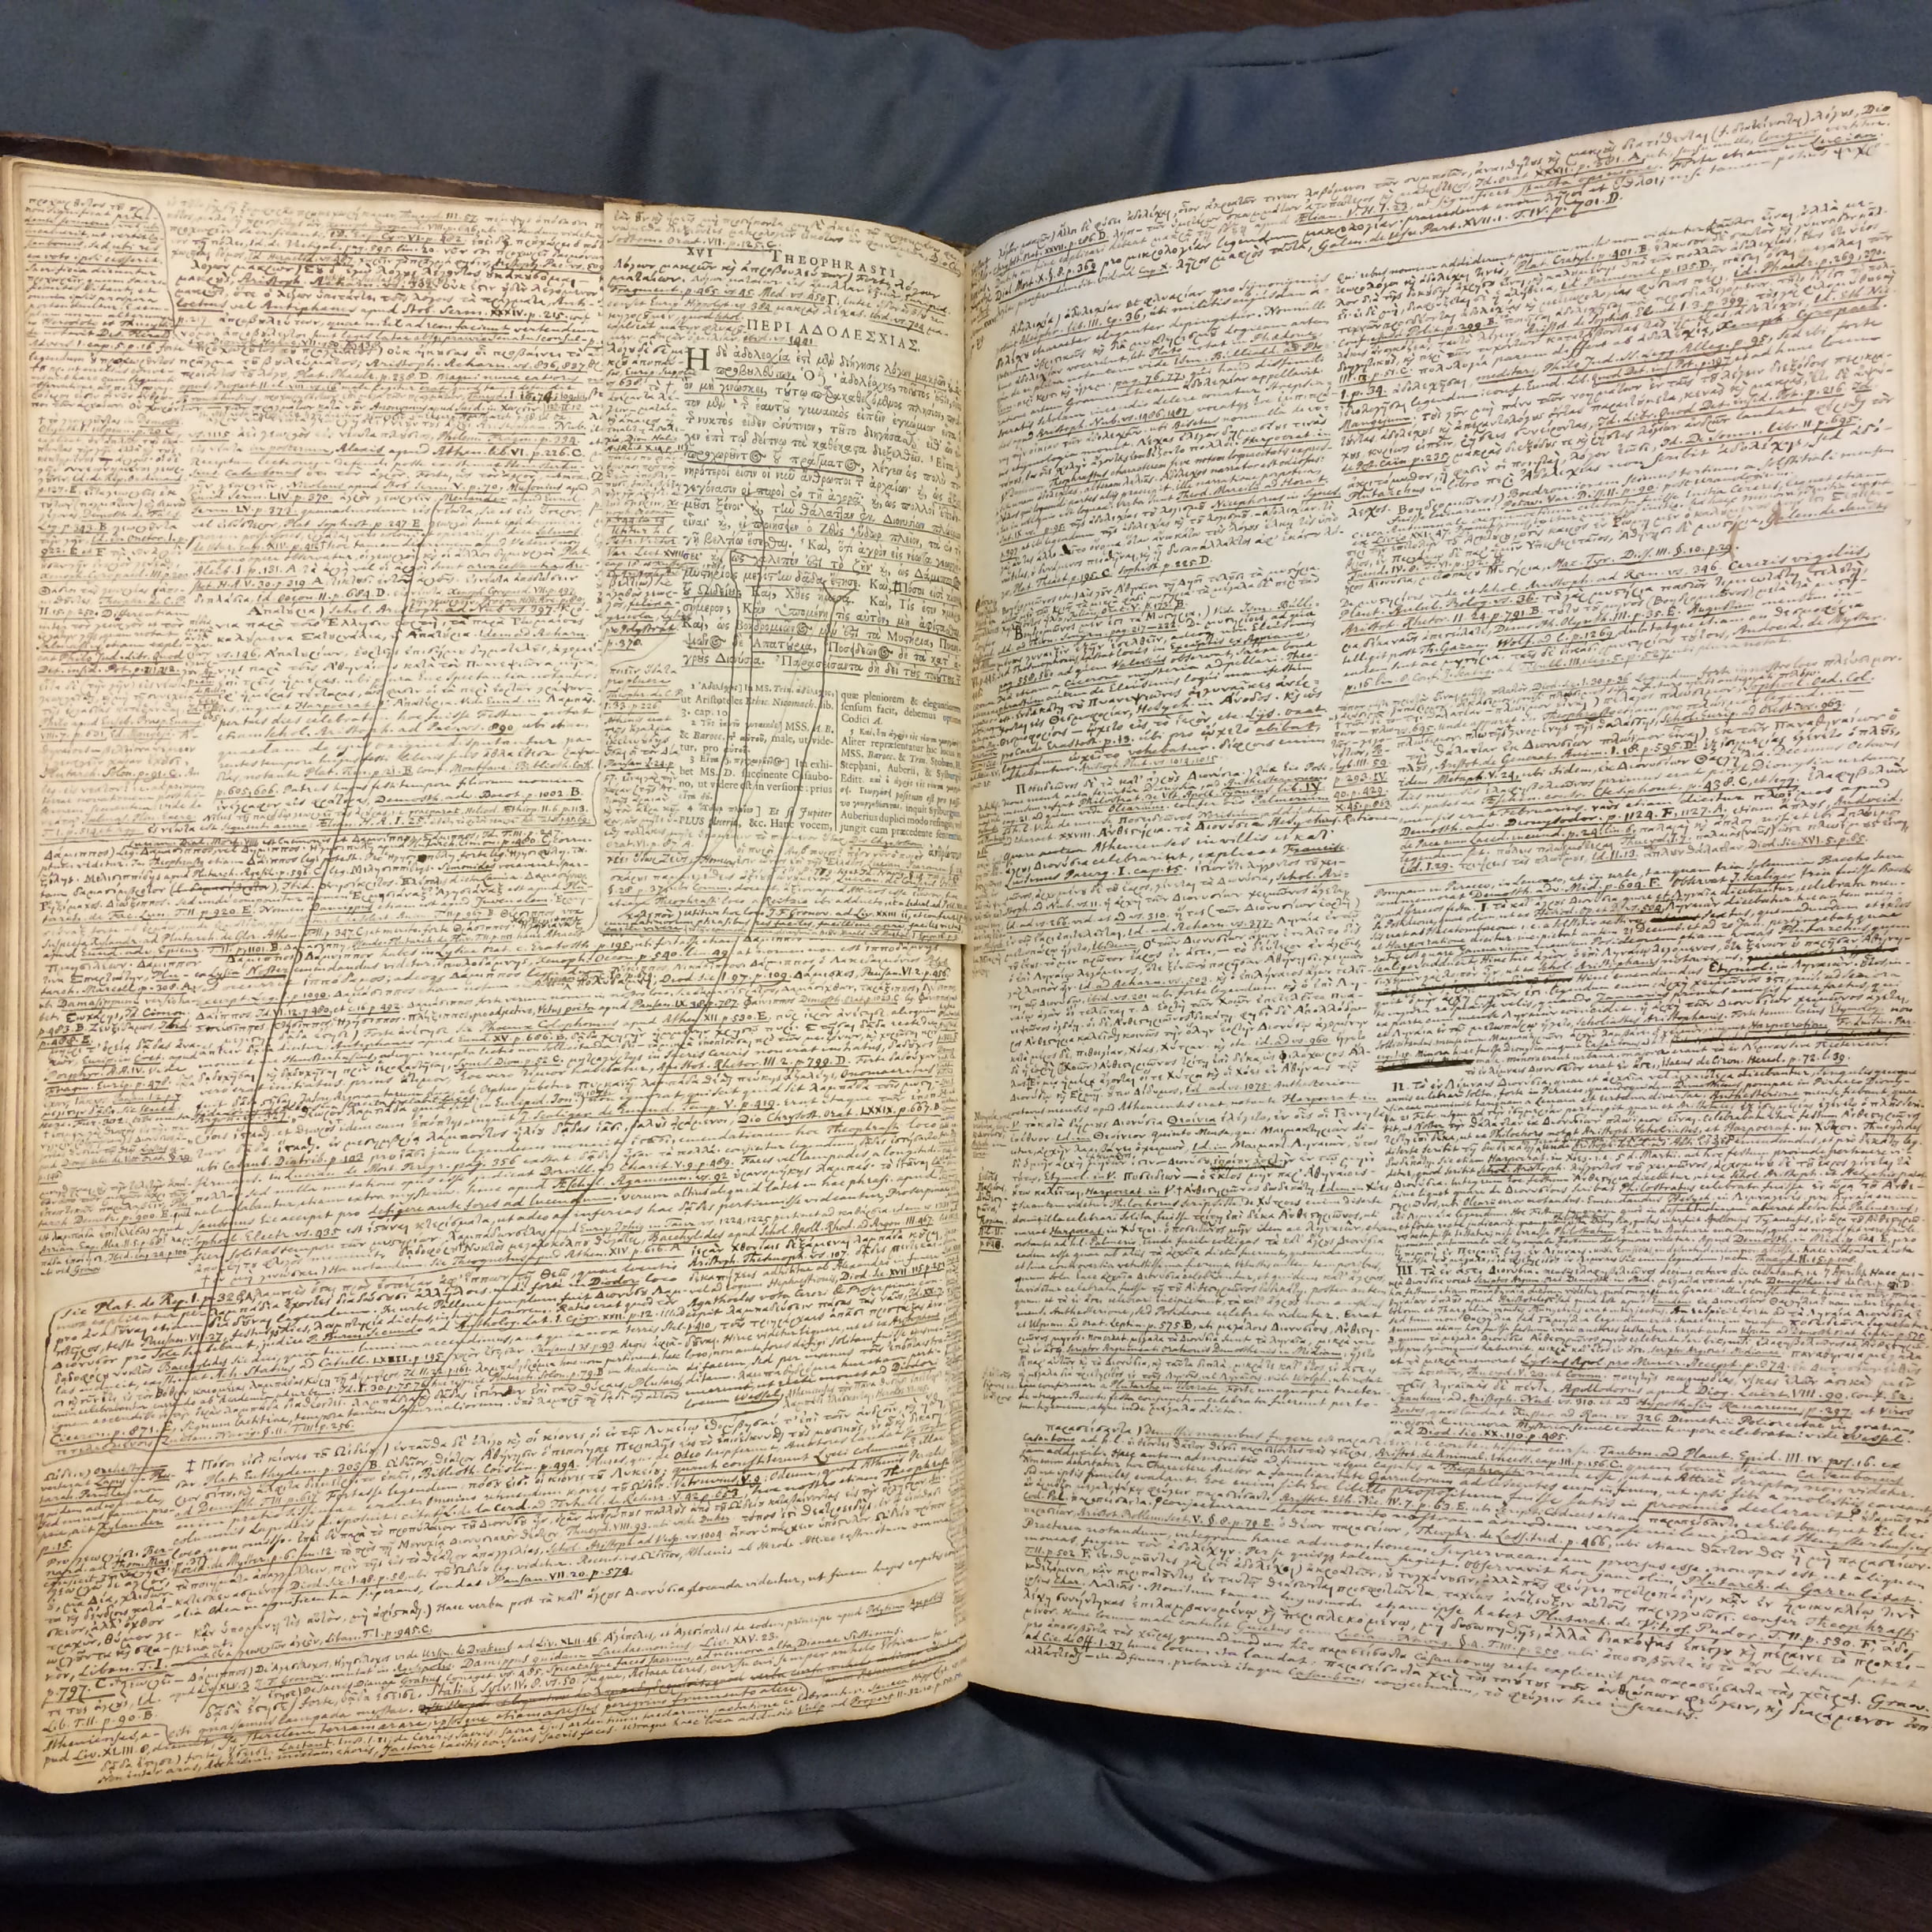 Fontein's working notes on Theophrastus. By permission of the Special Collections of the University of Amsterdam. Shelf mark: OTM Hs. XVI A5.